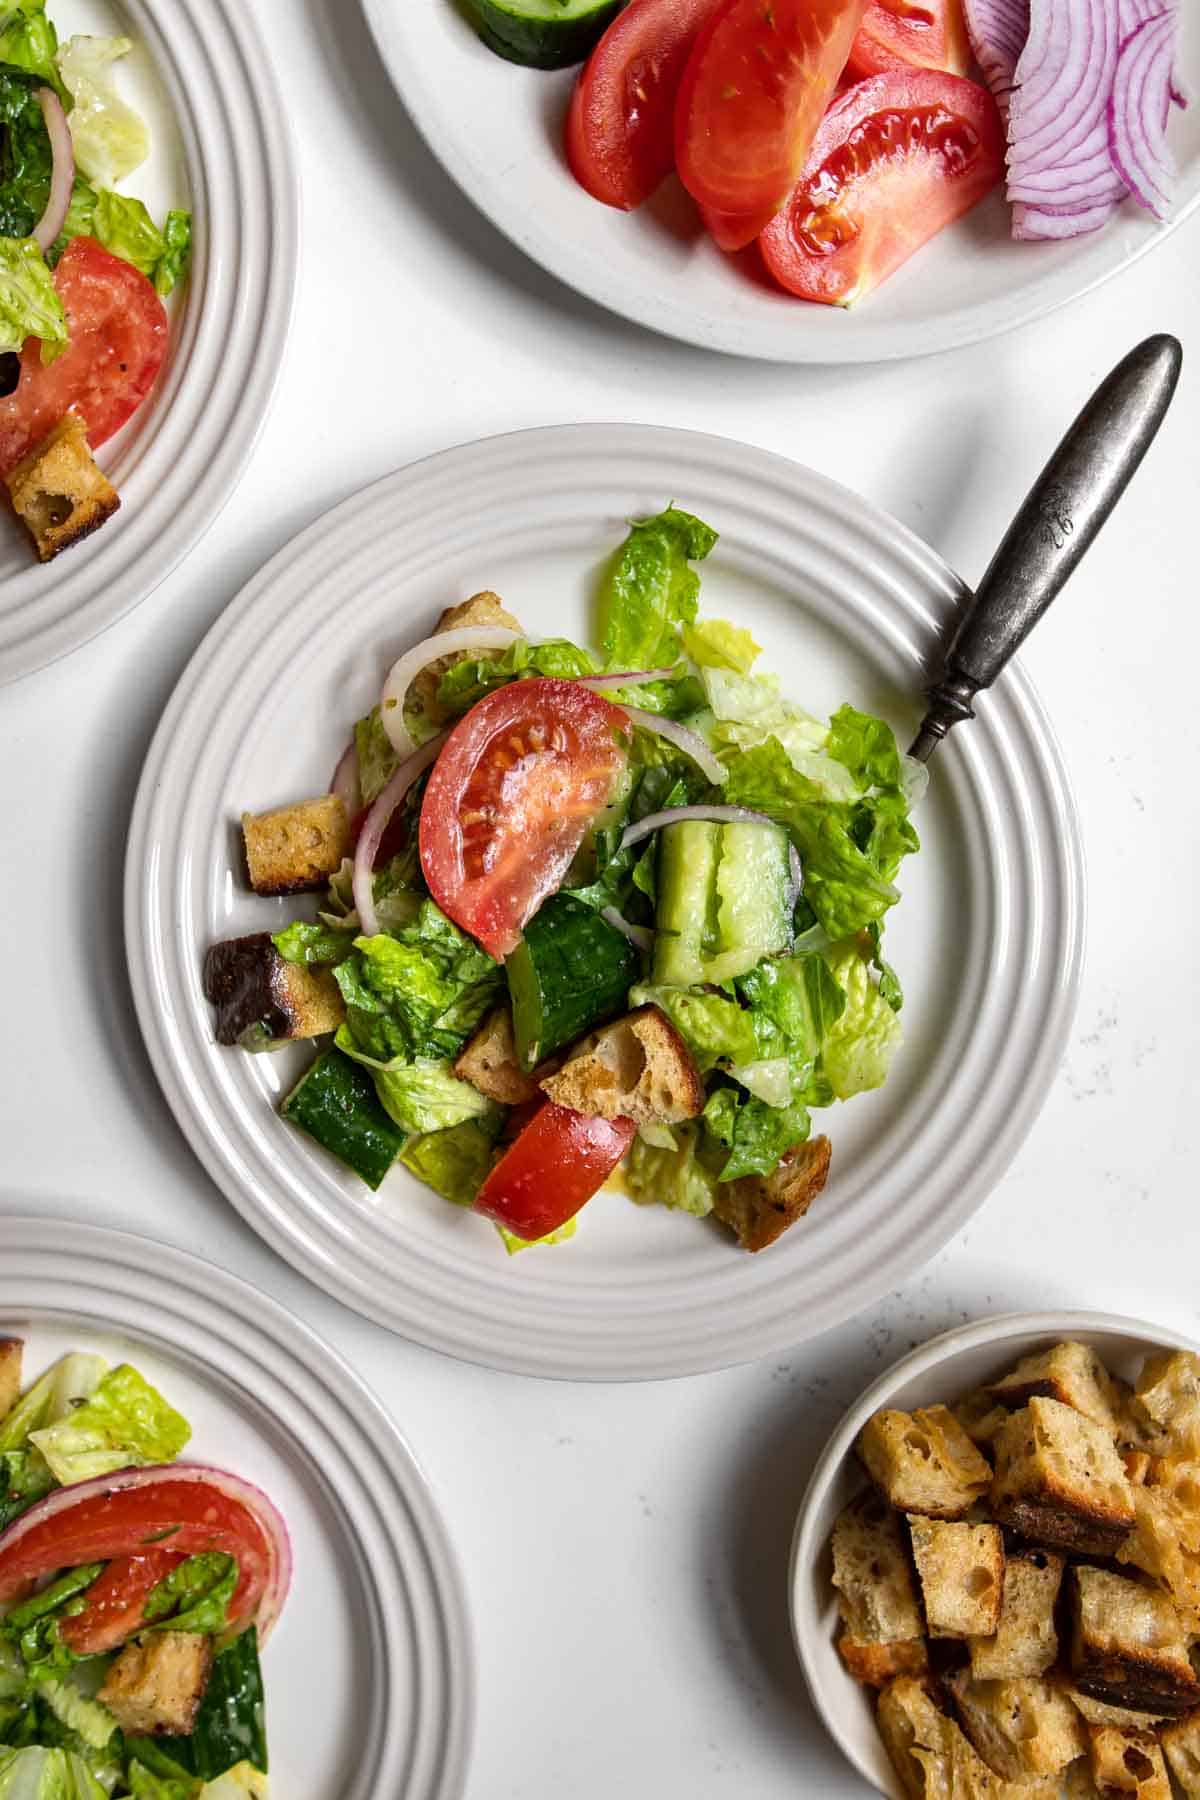 House salad topped with tomato, cucumber, sourdough croutons, and red onions on a plate with a fork.